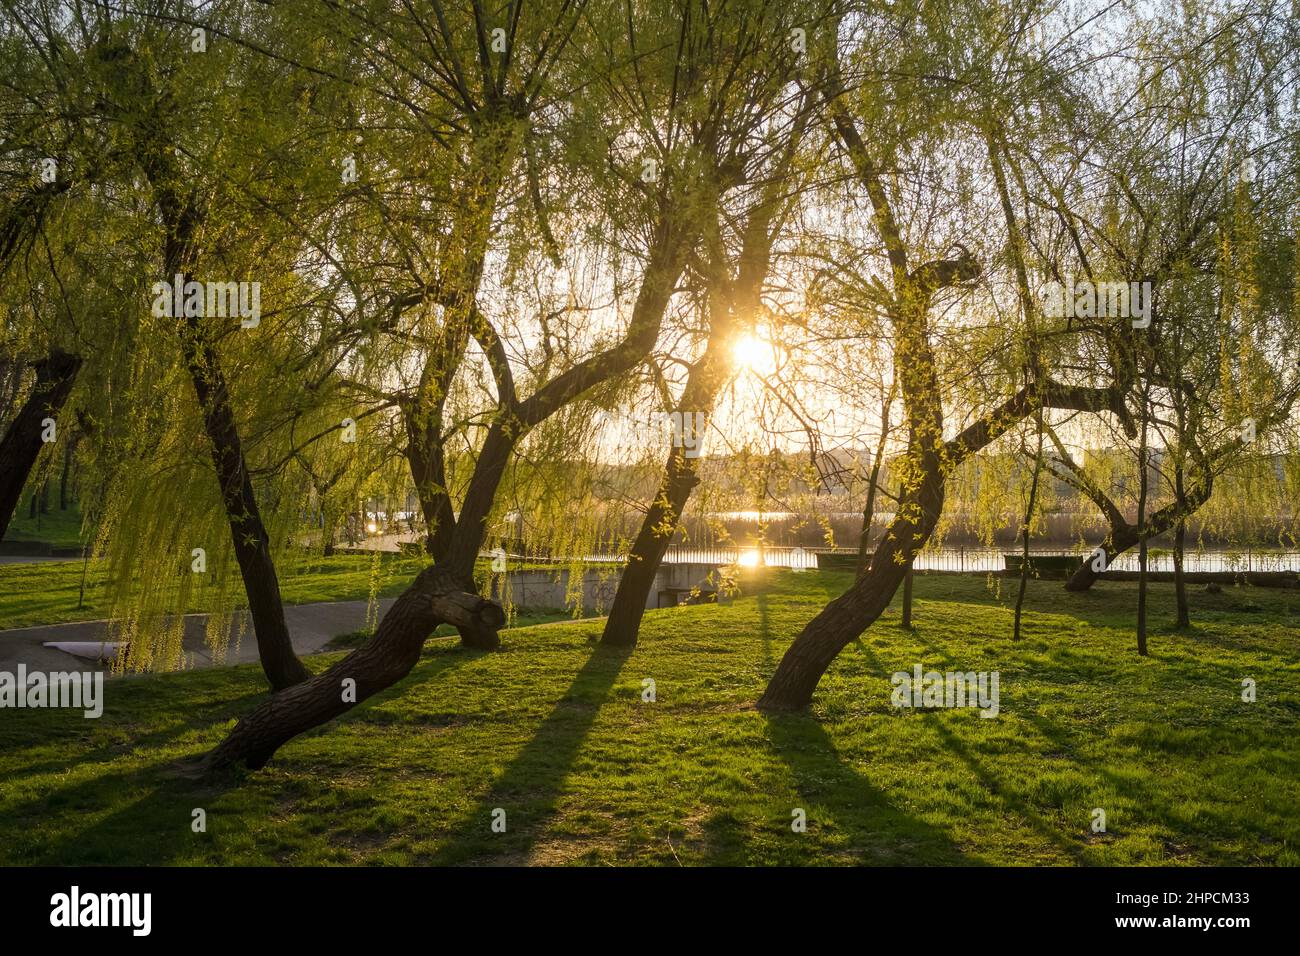 Willow trees in city park in spring at sunset Stock Photo